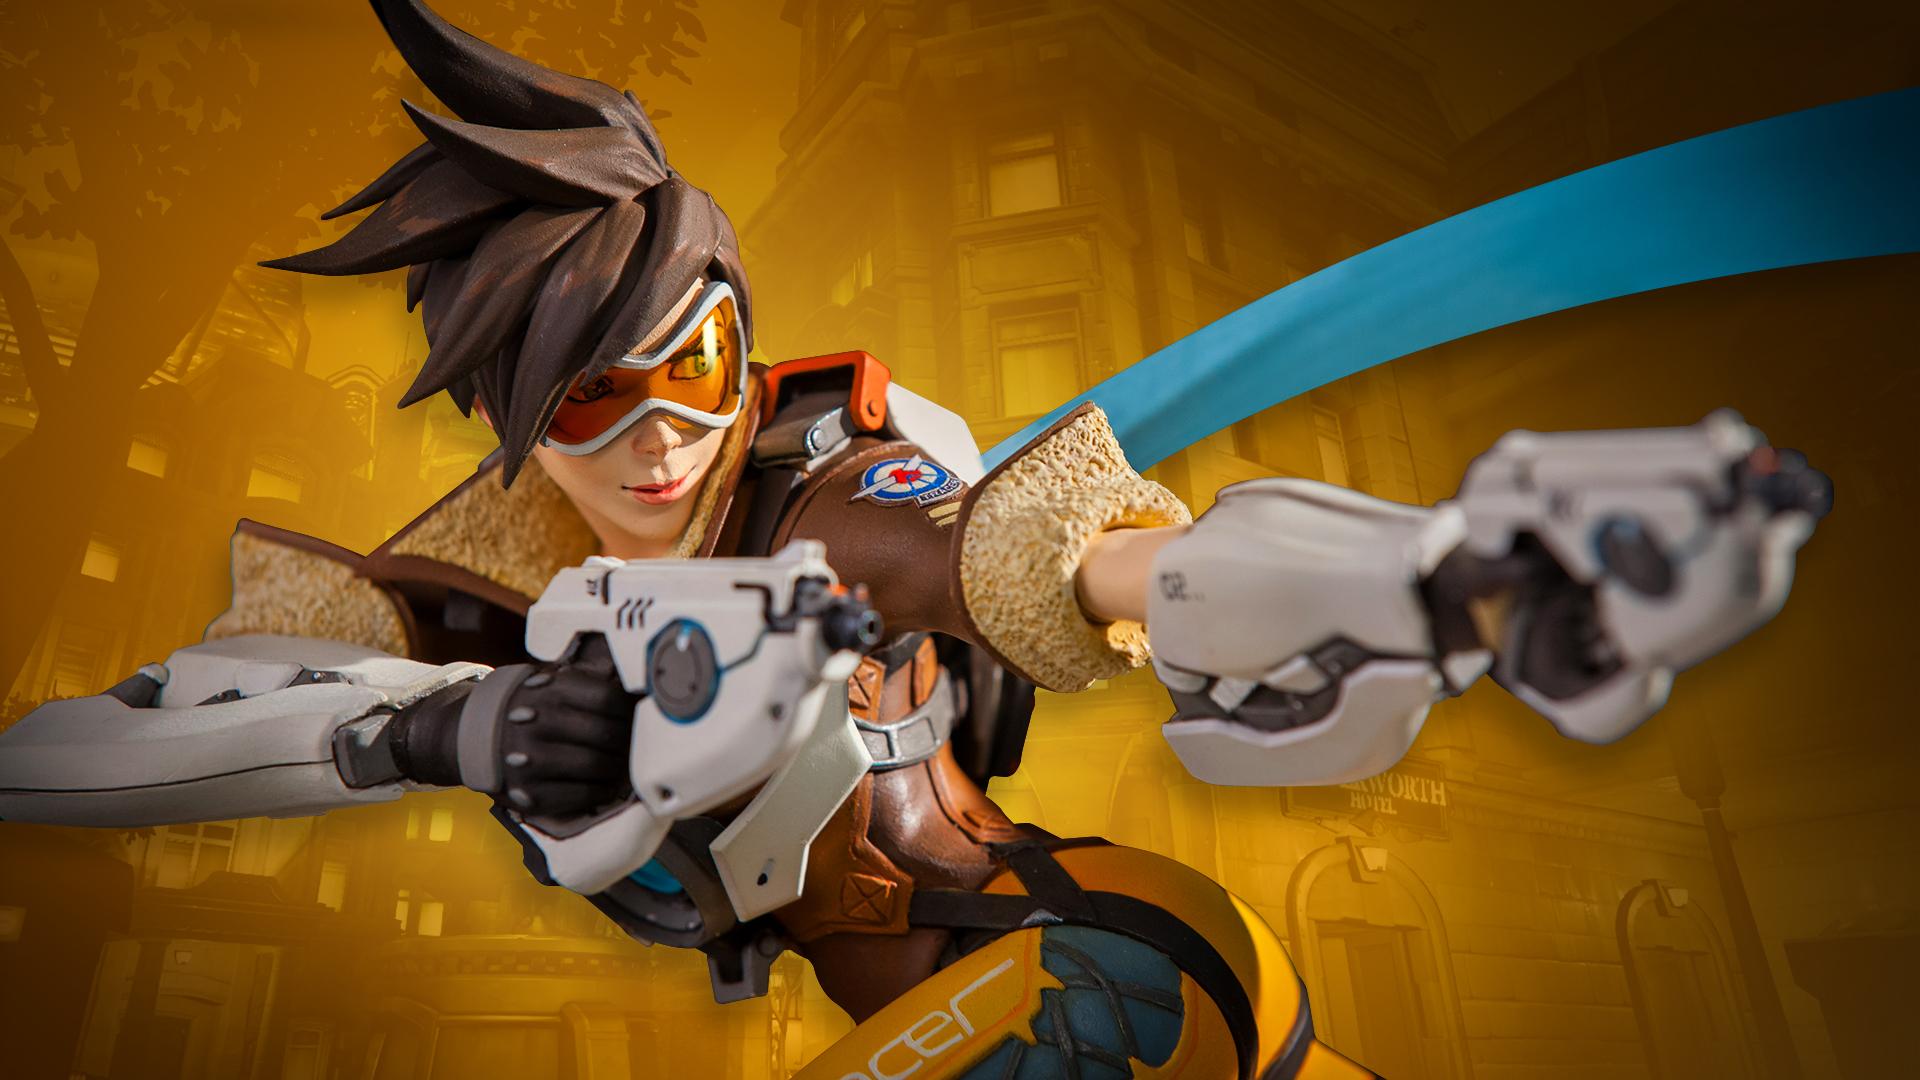 70+ Hot Pictures of Tracer From Overwatch 30